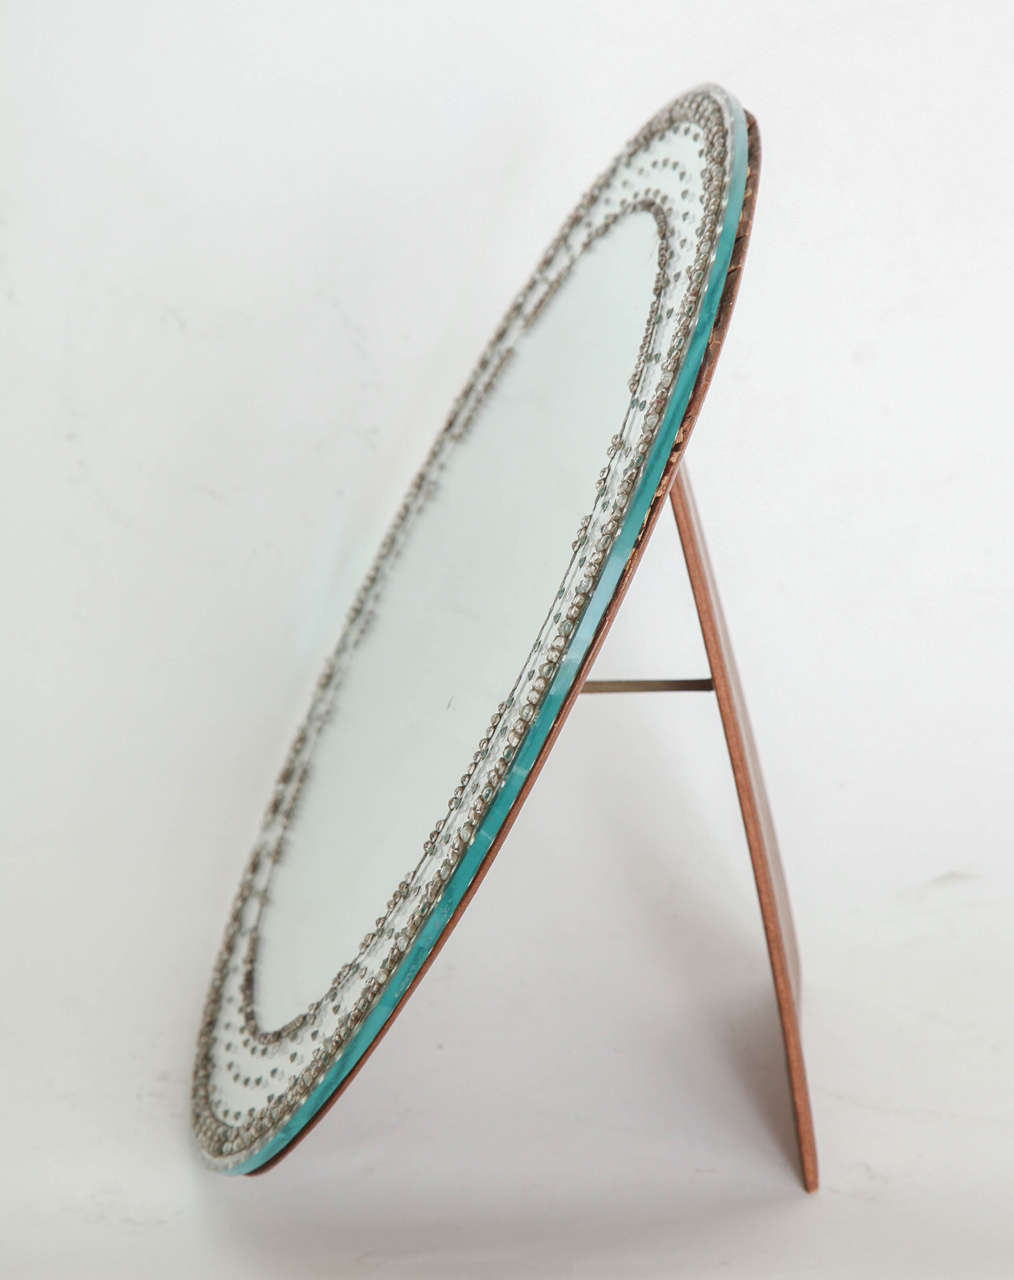 A wonderful Art Deco vanity mirror with  etching and glass  encrusted bead-like decoration...a little  jewel
This is from the 1930's and has some small missing crystals.